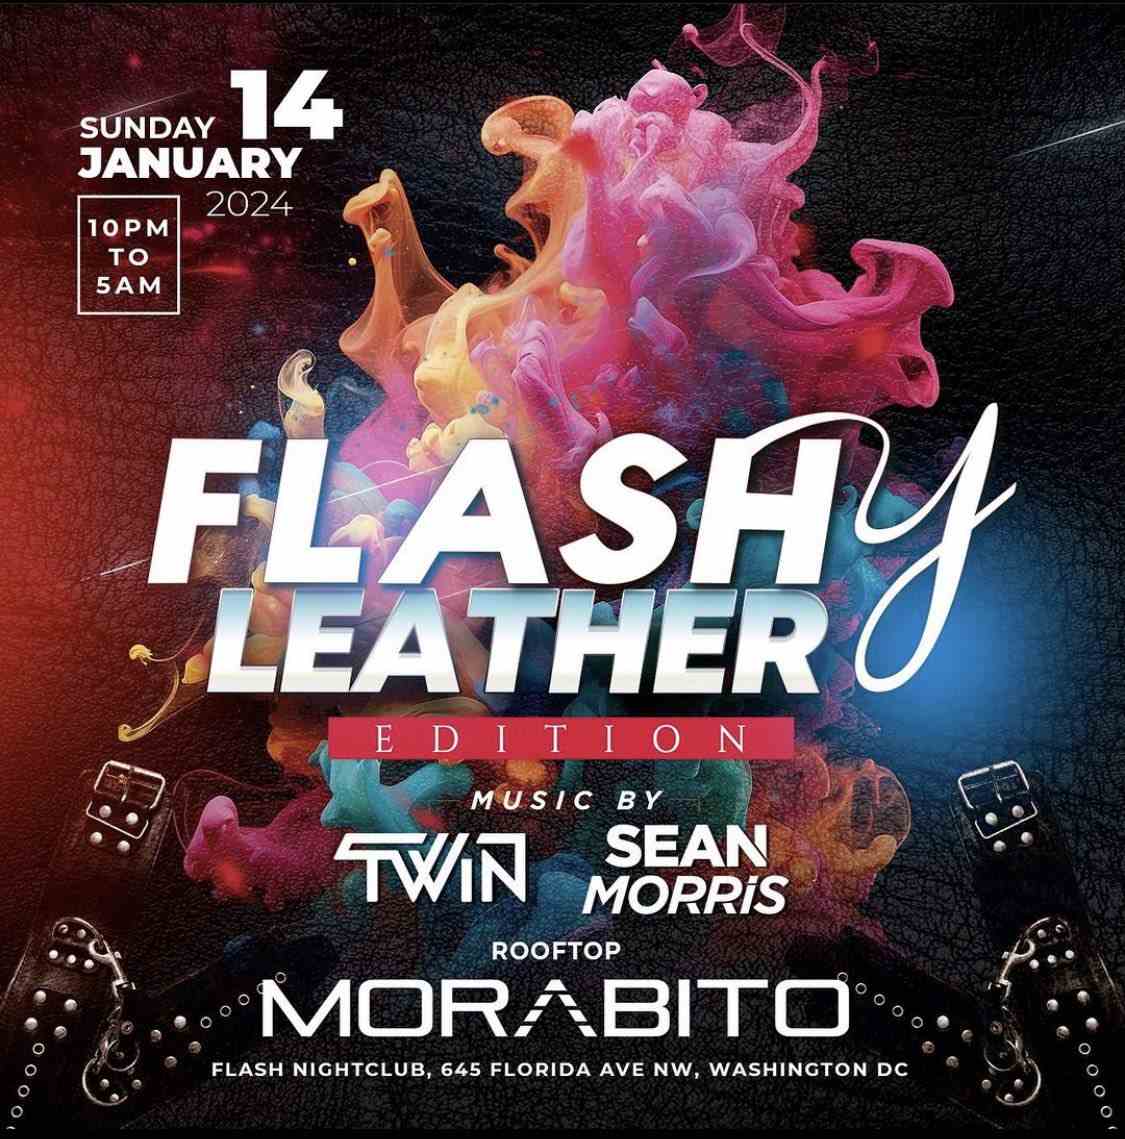 Flashy Leather Edition! event flyer